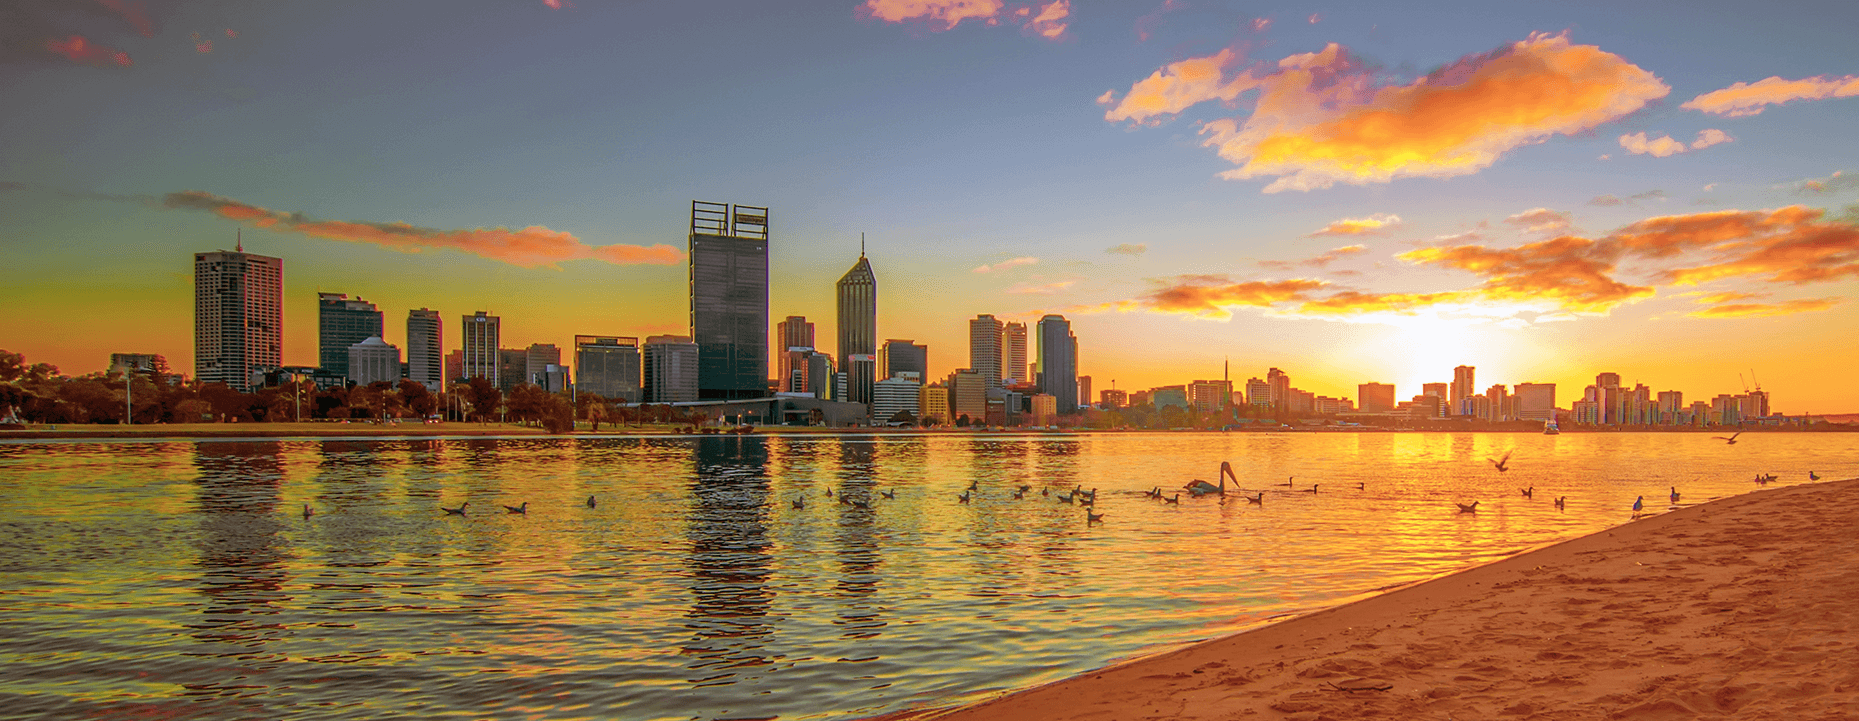 View of the Perth cityscape from the bank of Swan River